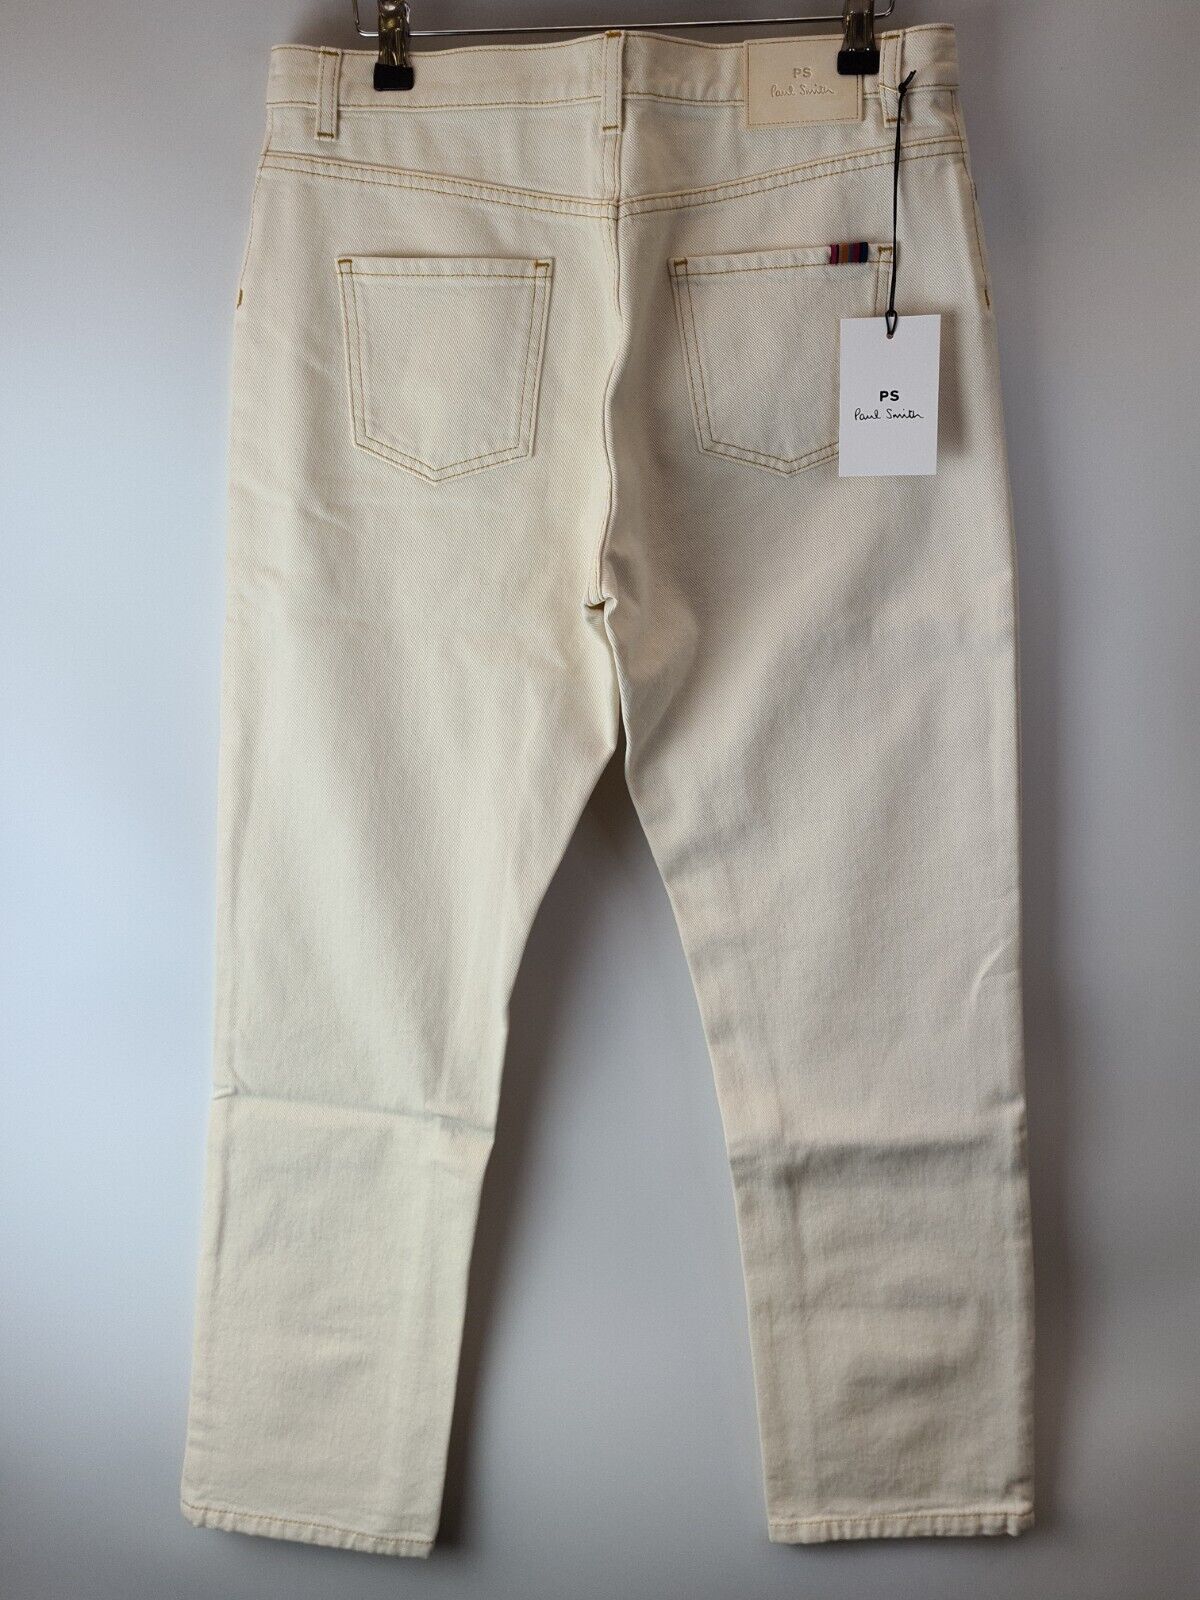 Paul Smith Women's Tapered Off White Denim Jeans Size W28 **** V31